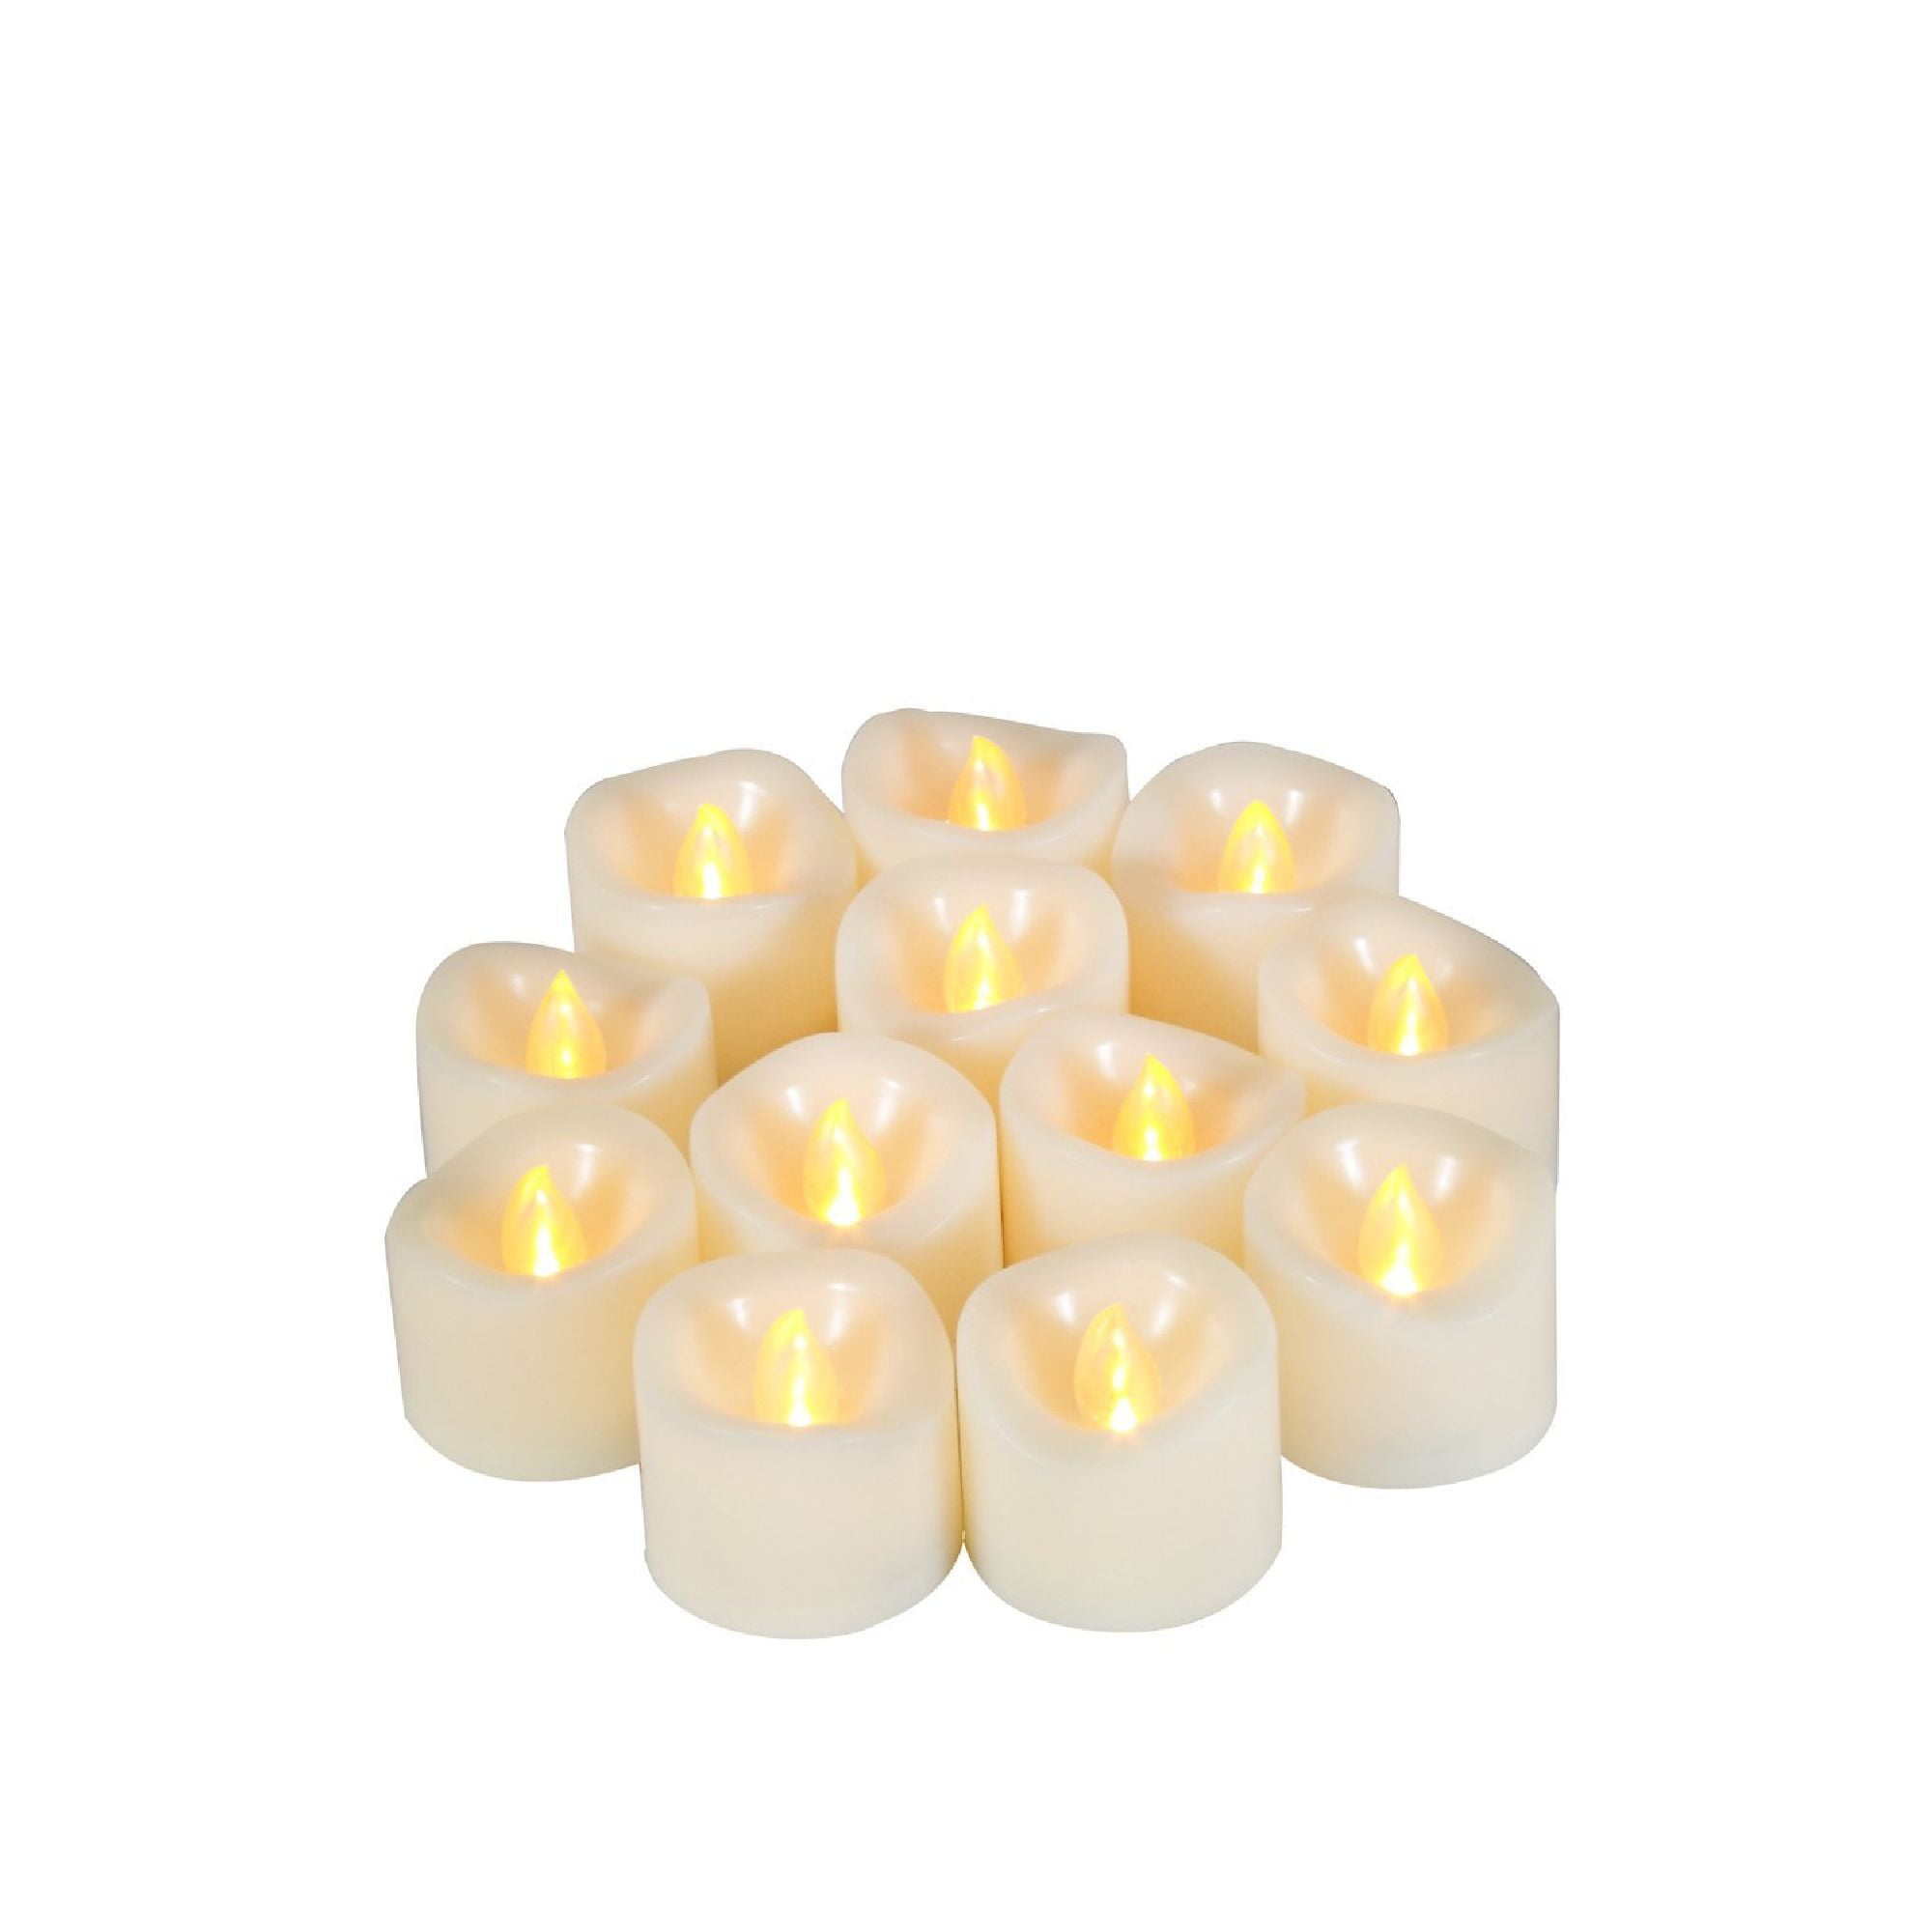 12 Pack Flameless LED Votive Candles Battery Operated Tealights Flicker w/Timer 